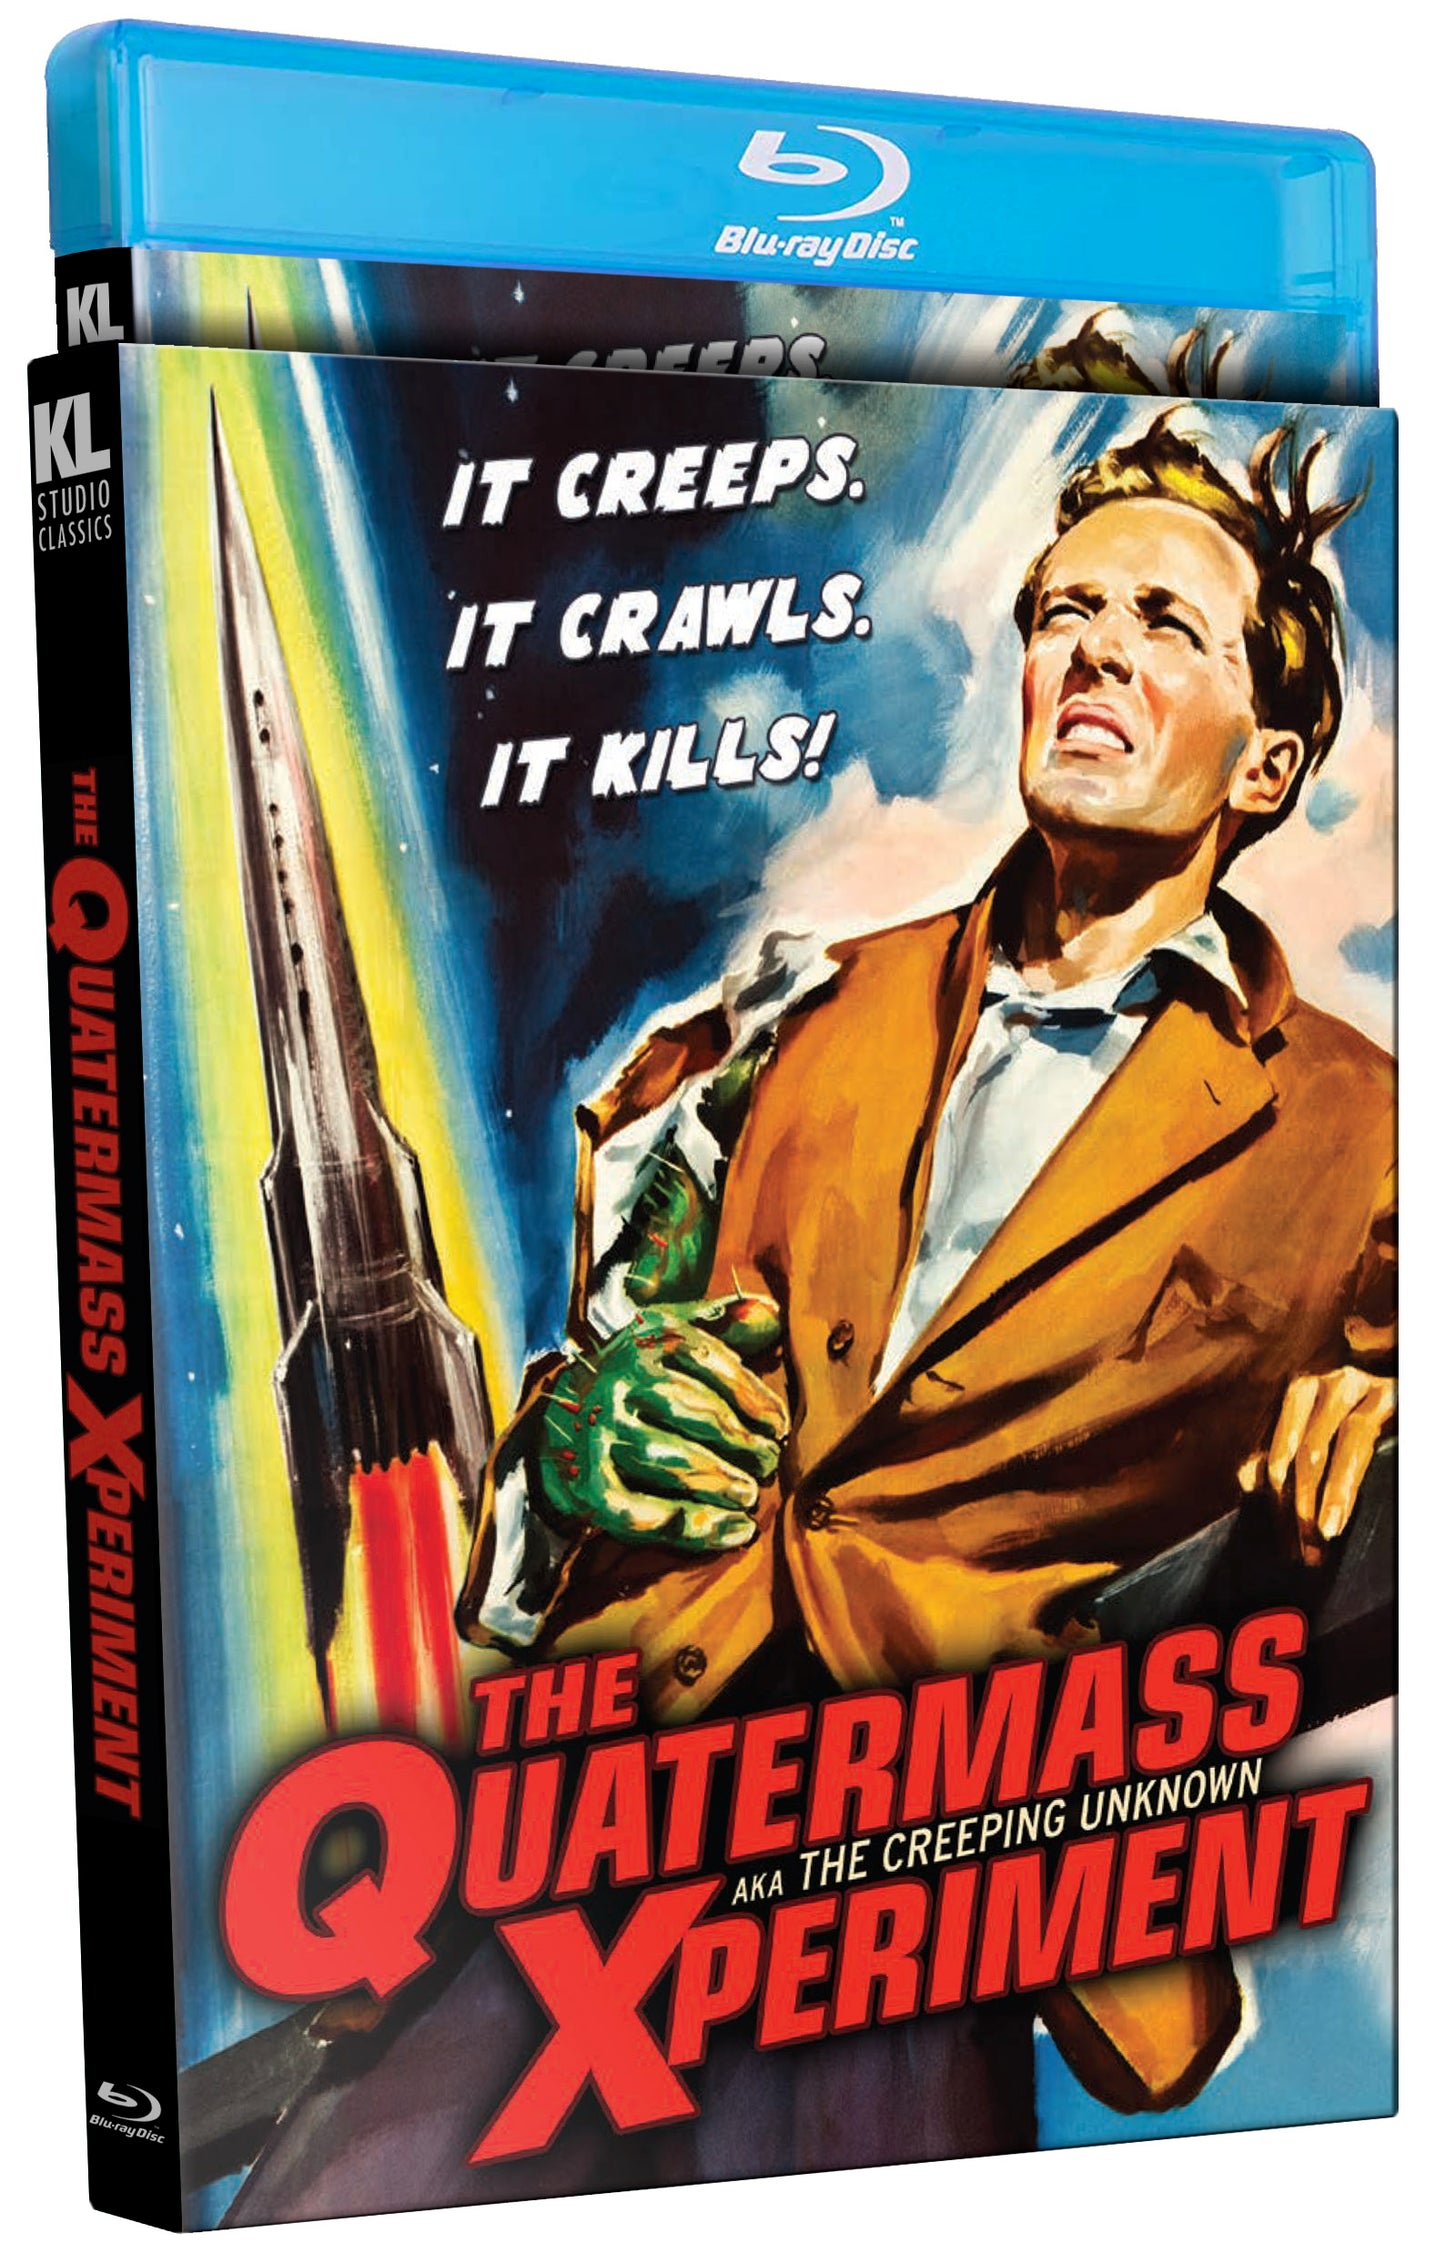 The Quatermass Xperiment Kino Lorber Blu-Ray [NEW] [SLIPCOVER]